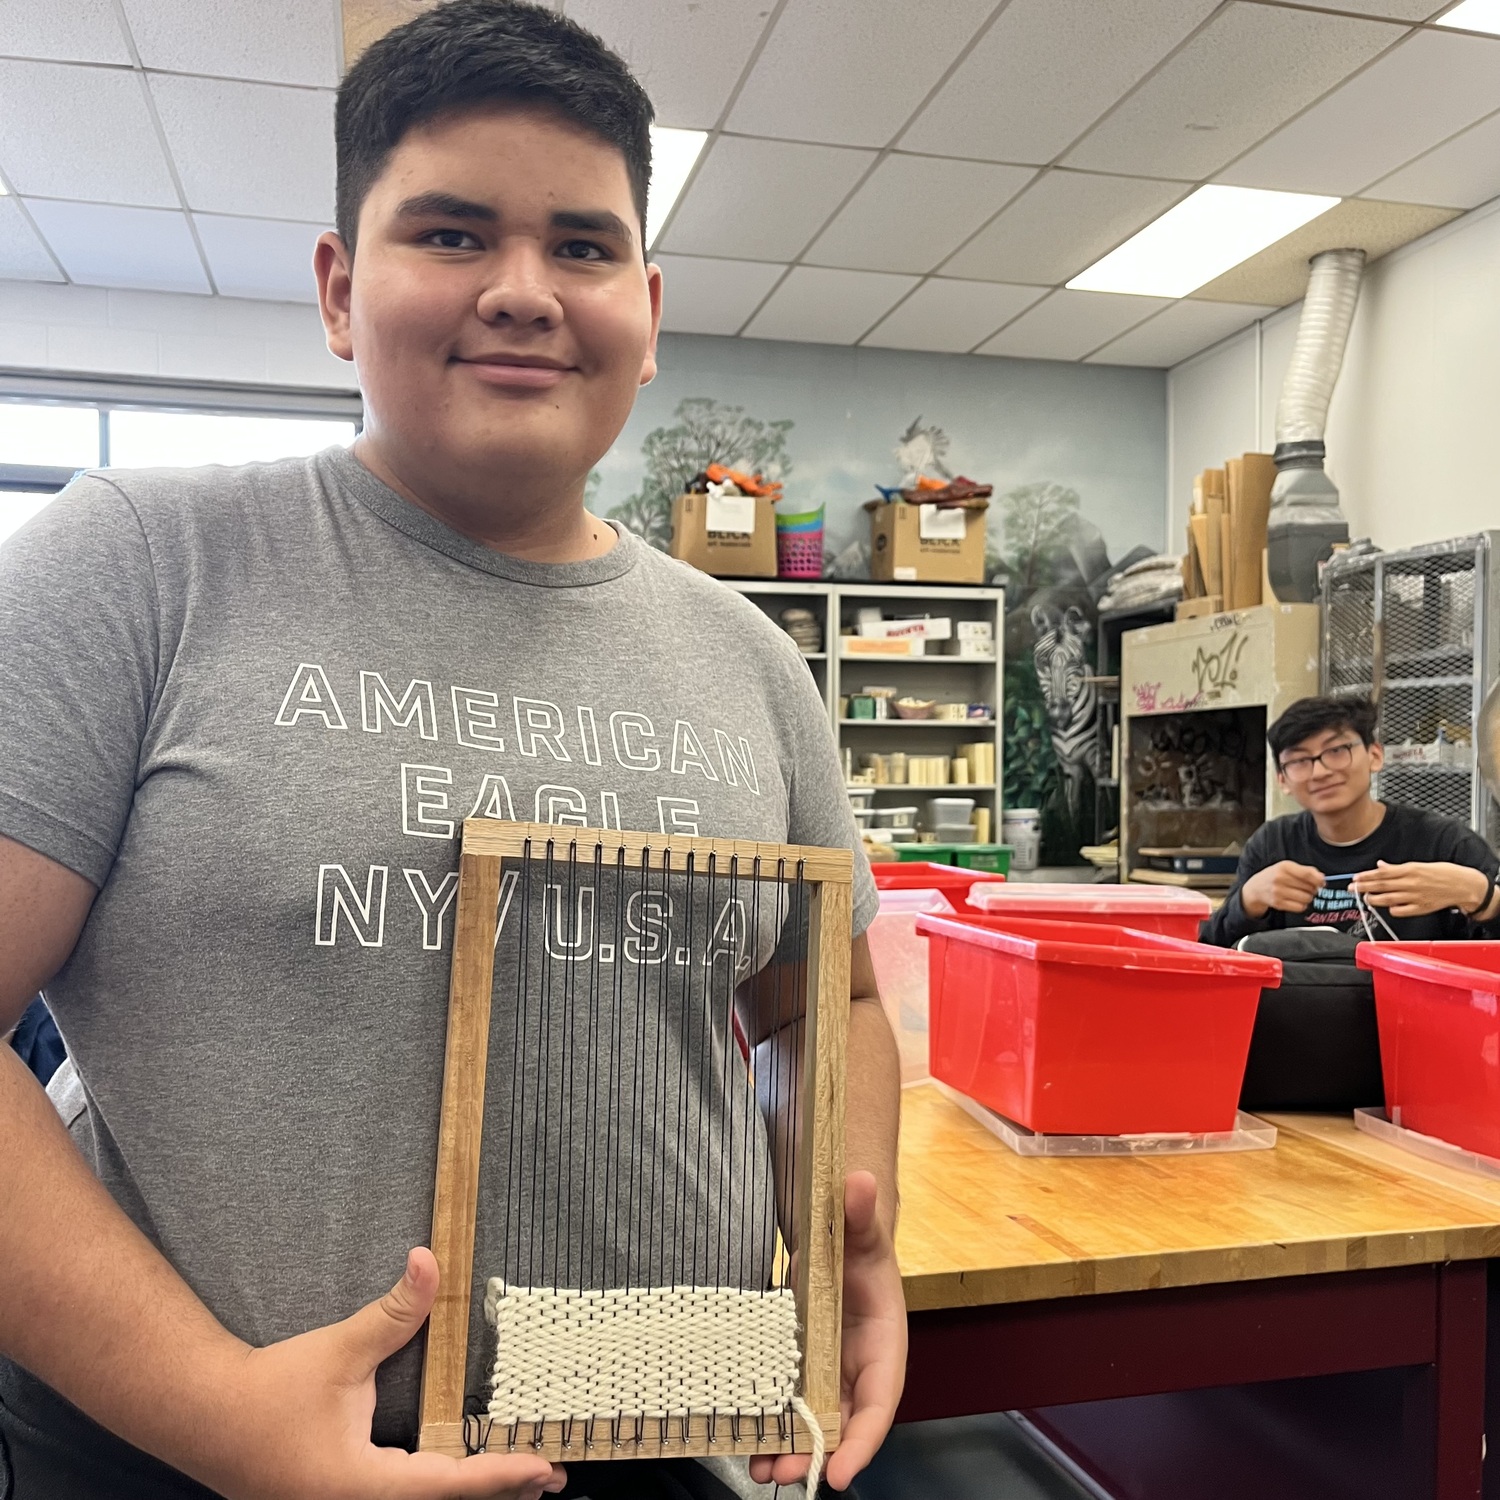 Southampton High School sophomore Israel Ruiz Nava is among the creative arts students who are kicking off Hispanic Heritage Month with a cultural lesson on one of the oldest art forms — weaving. Students reviewed the rich tradition of weaving styles and techniques of South America that have greatly influenced the craft since 10,000 BC. Building on the school’s
Hispanic Heritage Month theme, “Todos Somos, Somos Uno: We Are All, We Are One,” the
students also learned about the power of community work. Once complete, their amazing
woven works of art will be hung in the school library. COURTESY SOUTHAMPTON SCHOOL DISTRICT